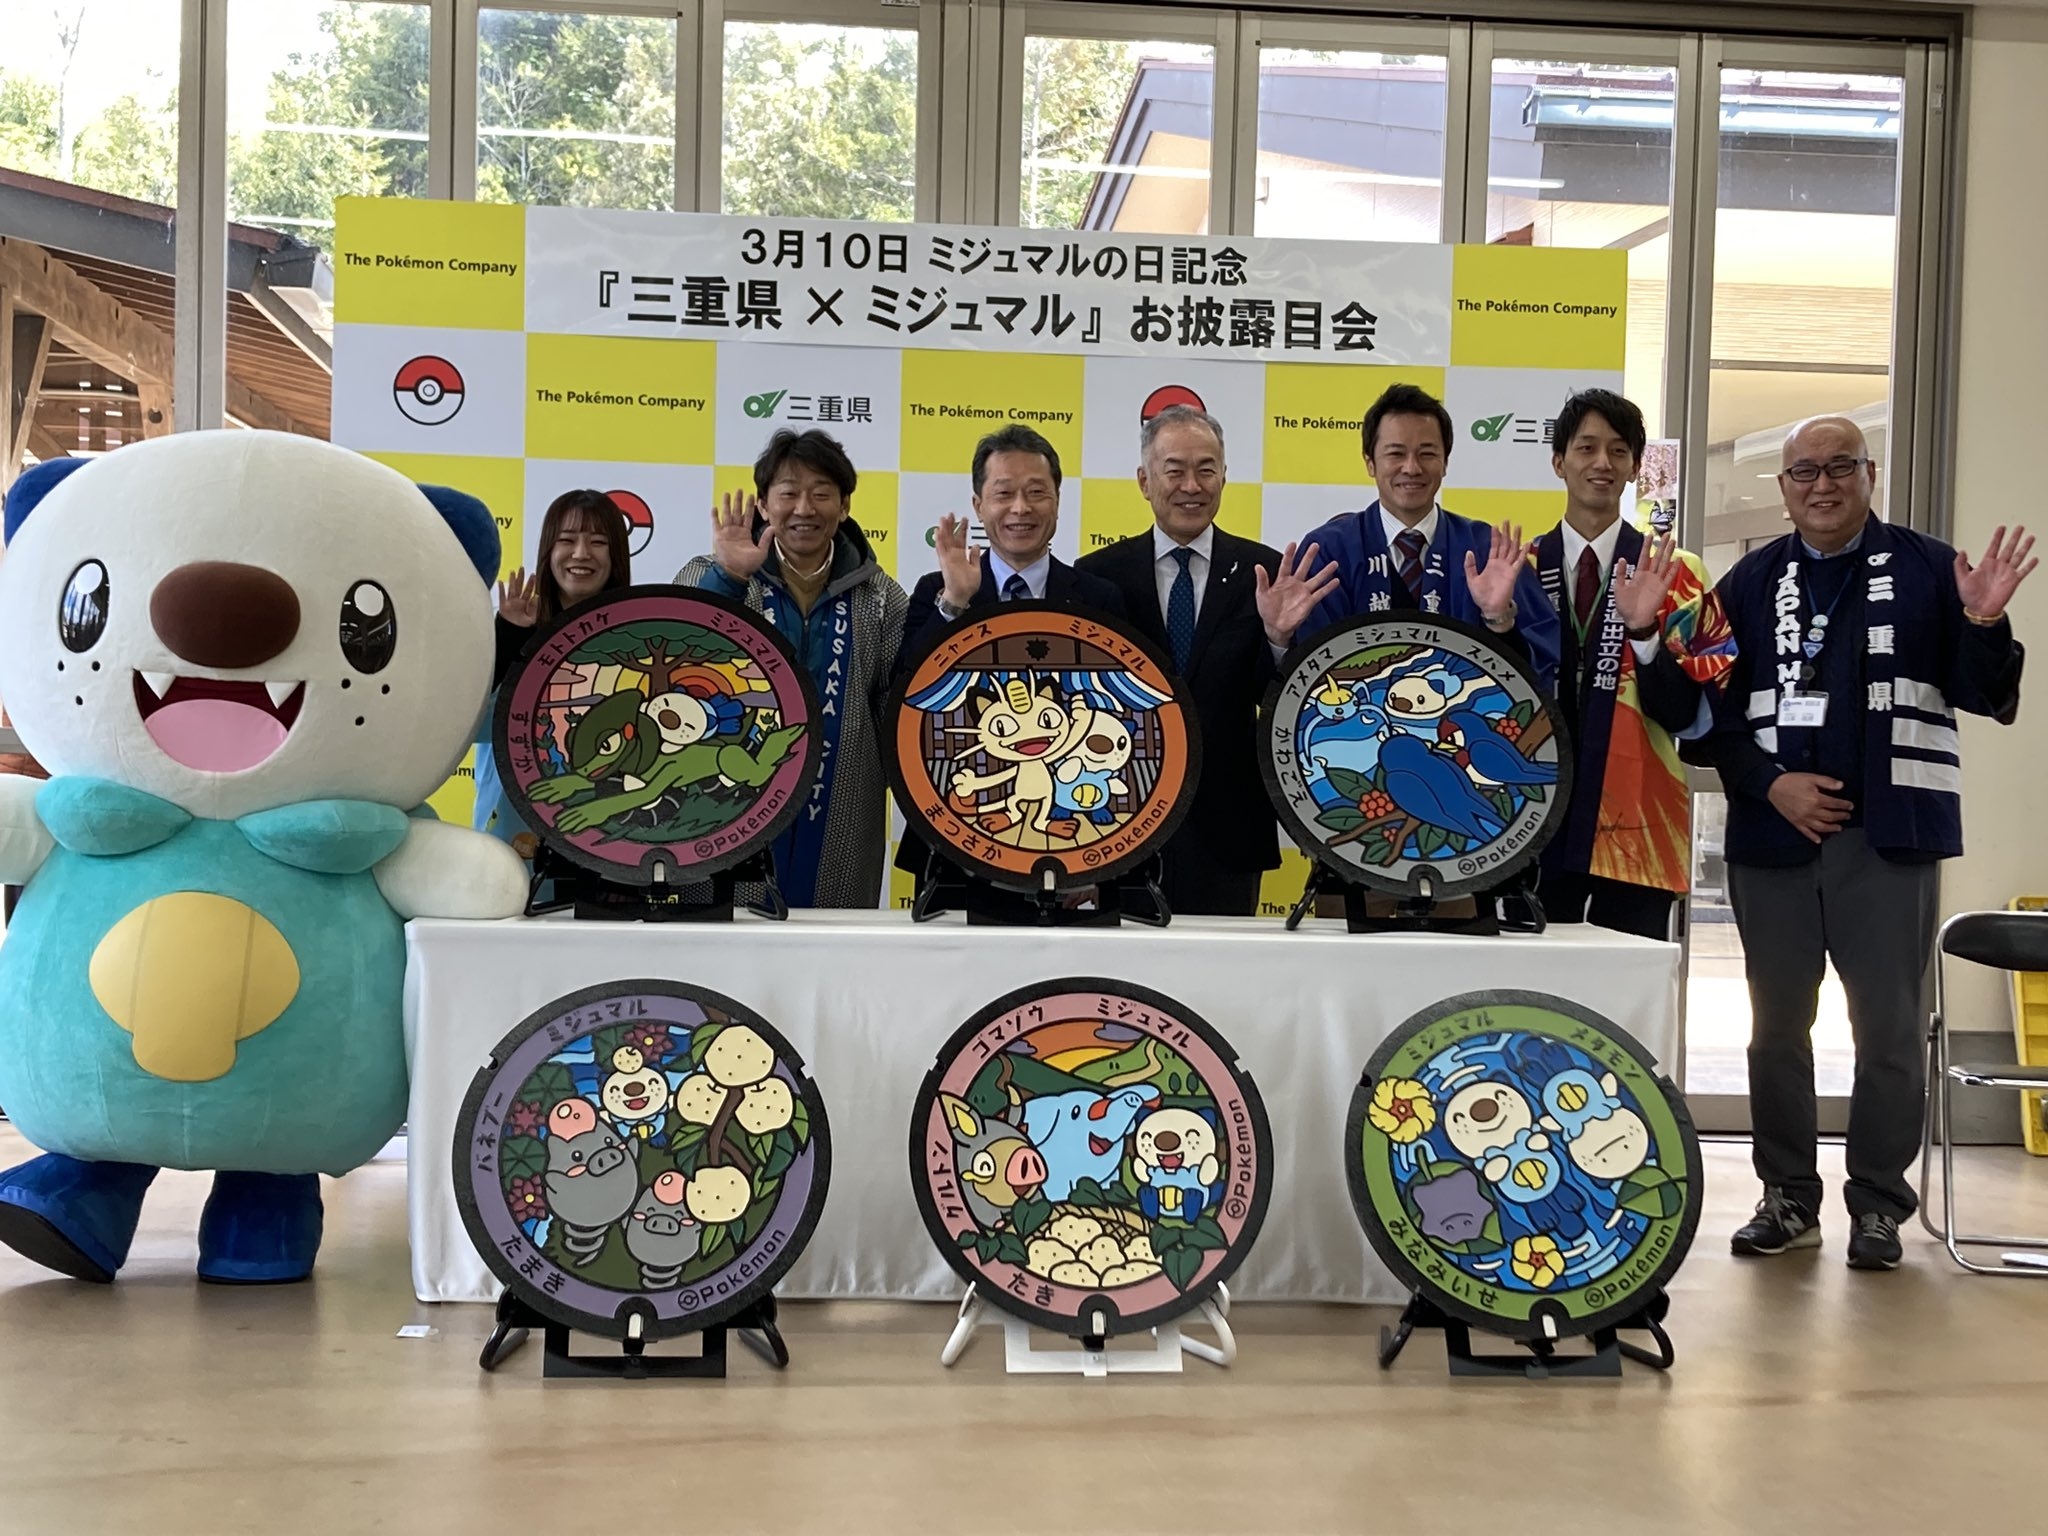 Politicians from Mie Prefecture with Oshawatt and the new Poké Lids